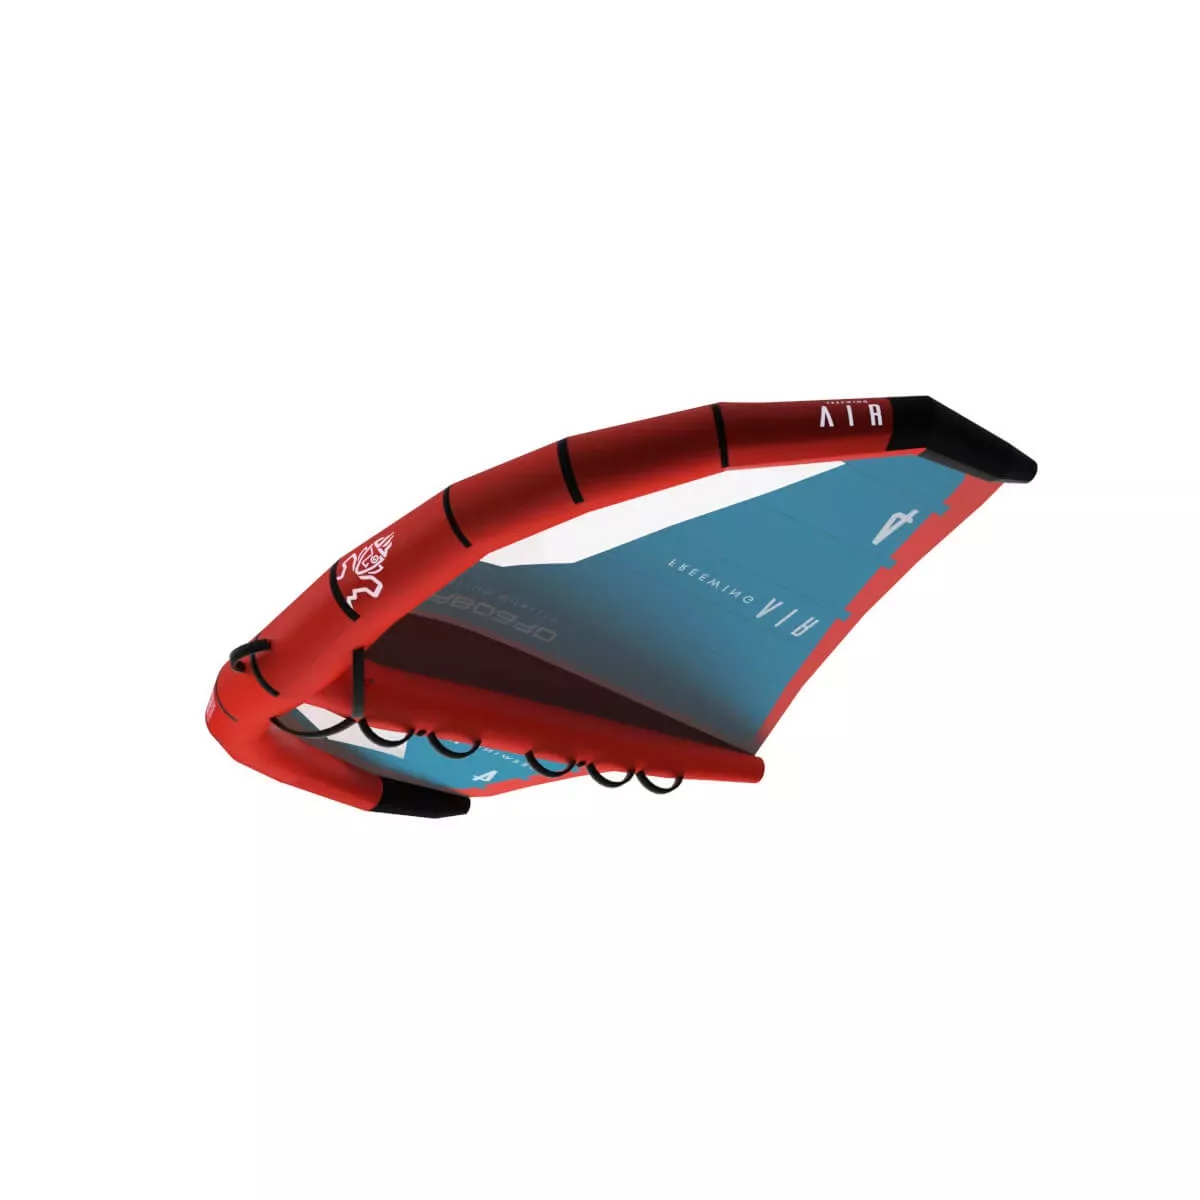 starboard-x-airush-freewing-air-v2-70100-22-2036-4